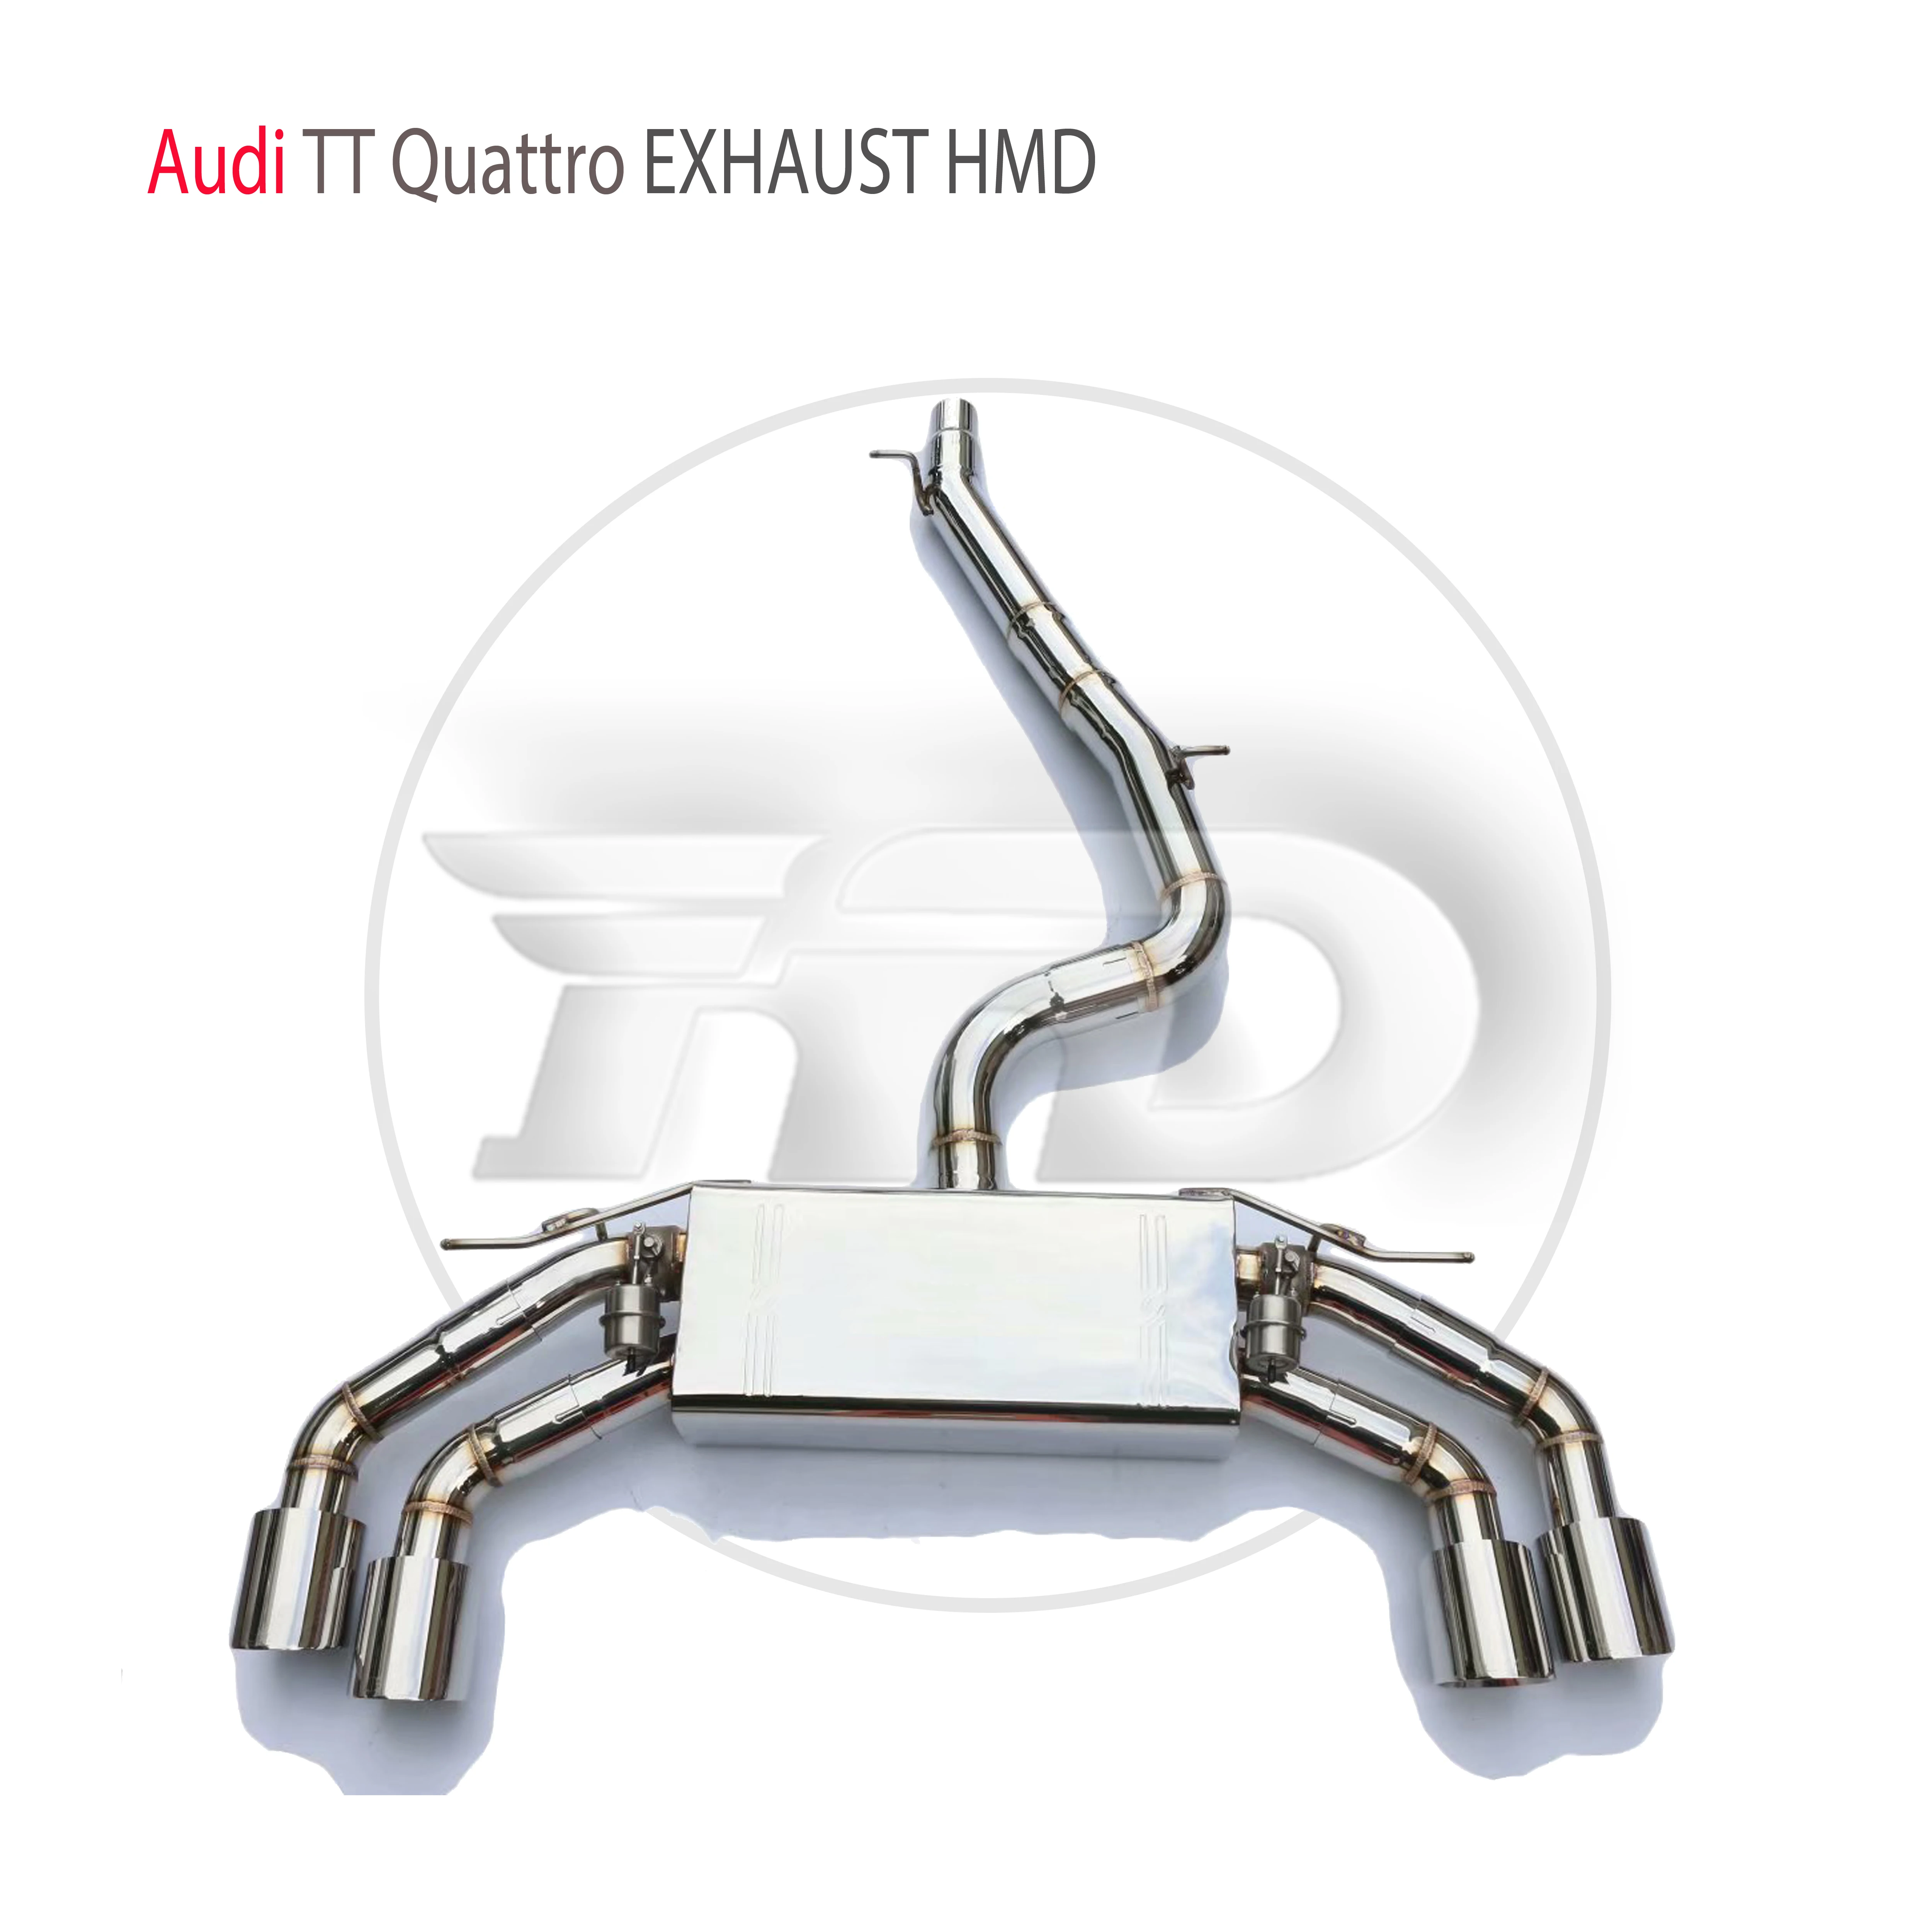 

HMD Stainless Steel Exhaust System Manifold Downpipe Is Suitable For Audi TT Quattro Auto Modification Valve Car Accessories